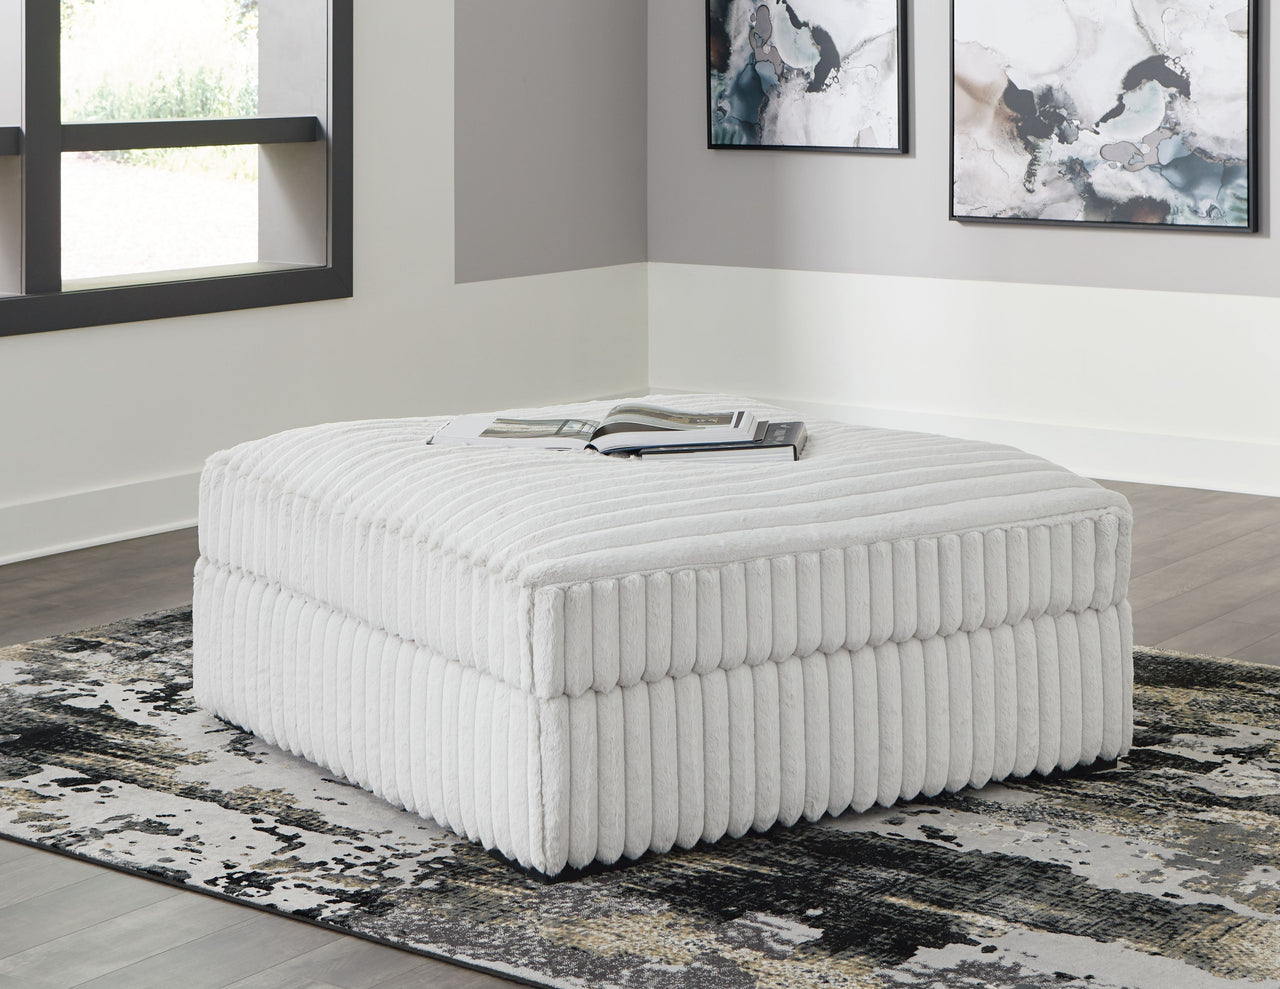 Stupendous - Alloy - Oversized Accent Ottoman - Tony's Home Furnishings